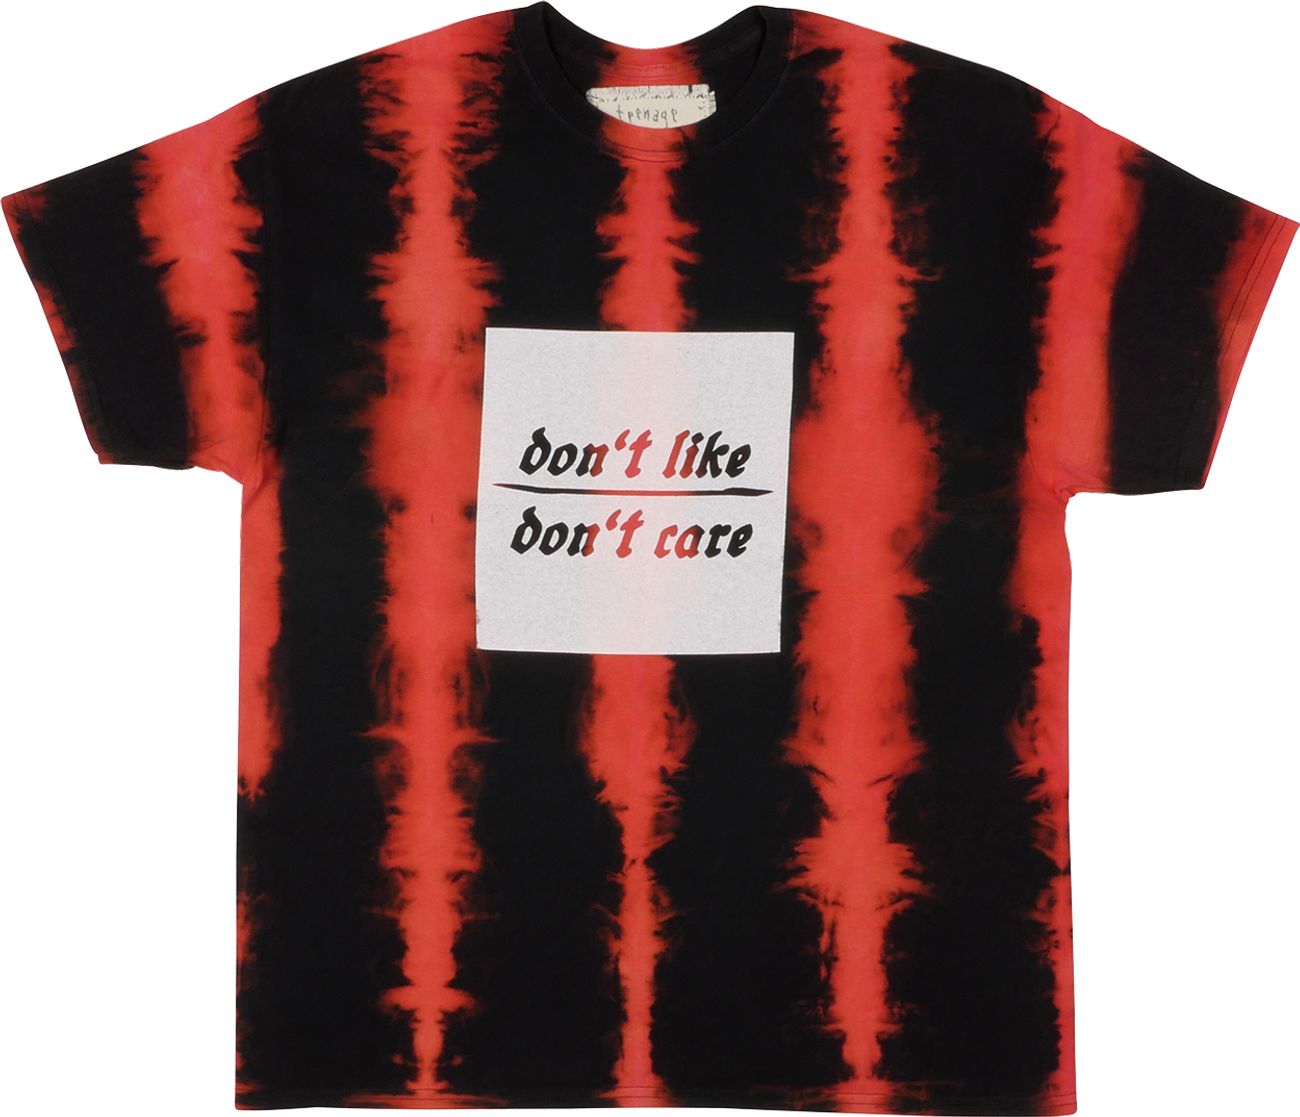 Teenage Angst "Don't like, don't care" T-Shirt - tie dye vertical red